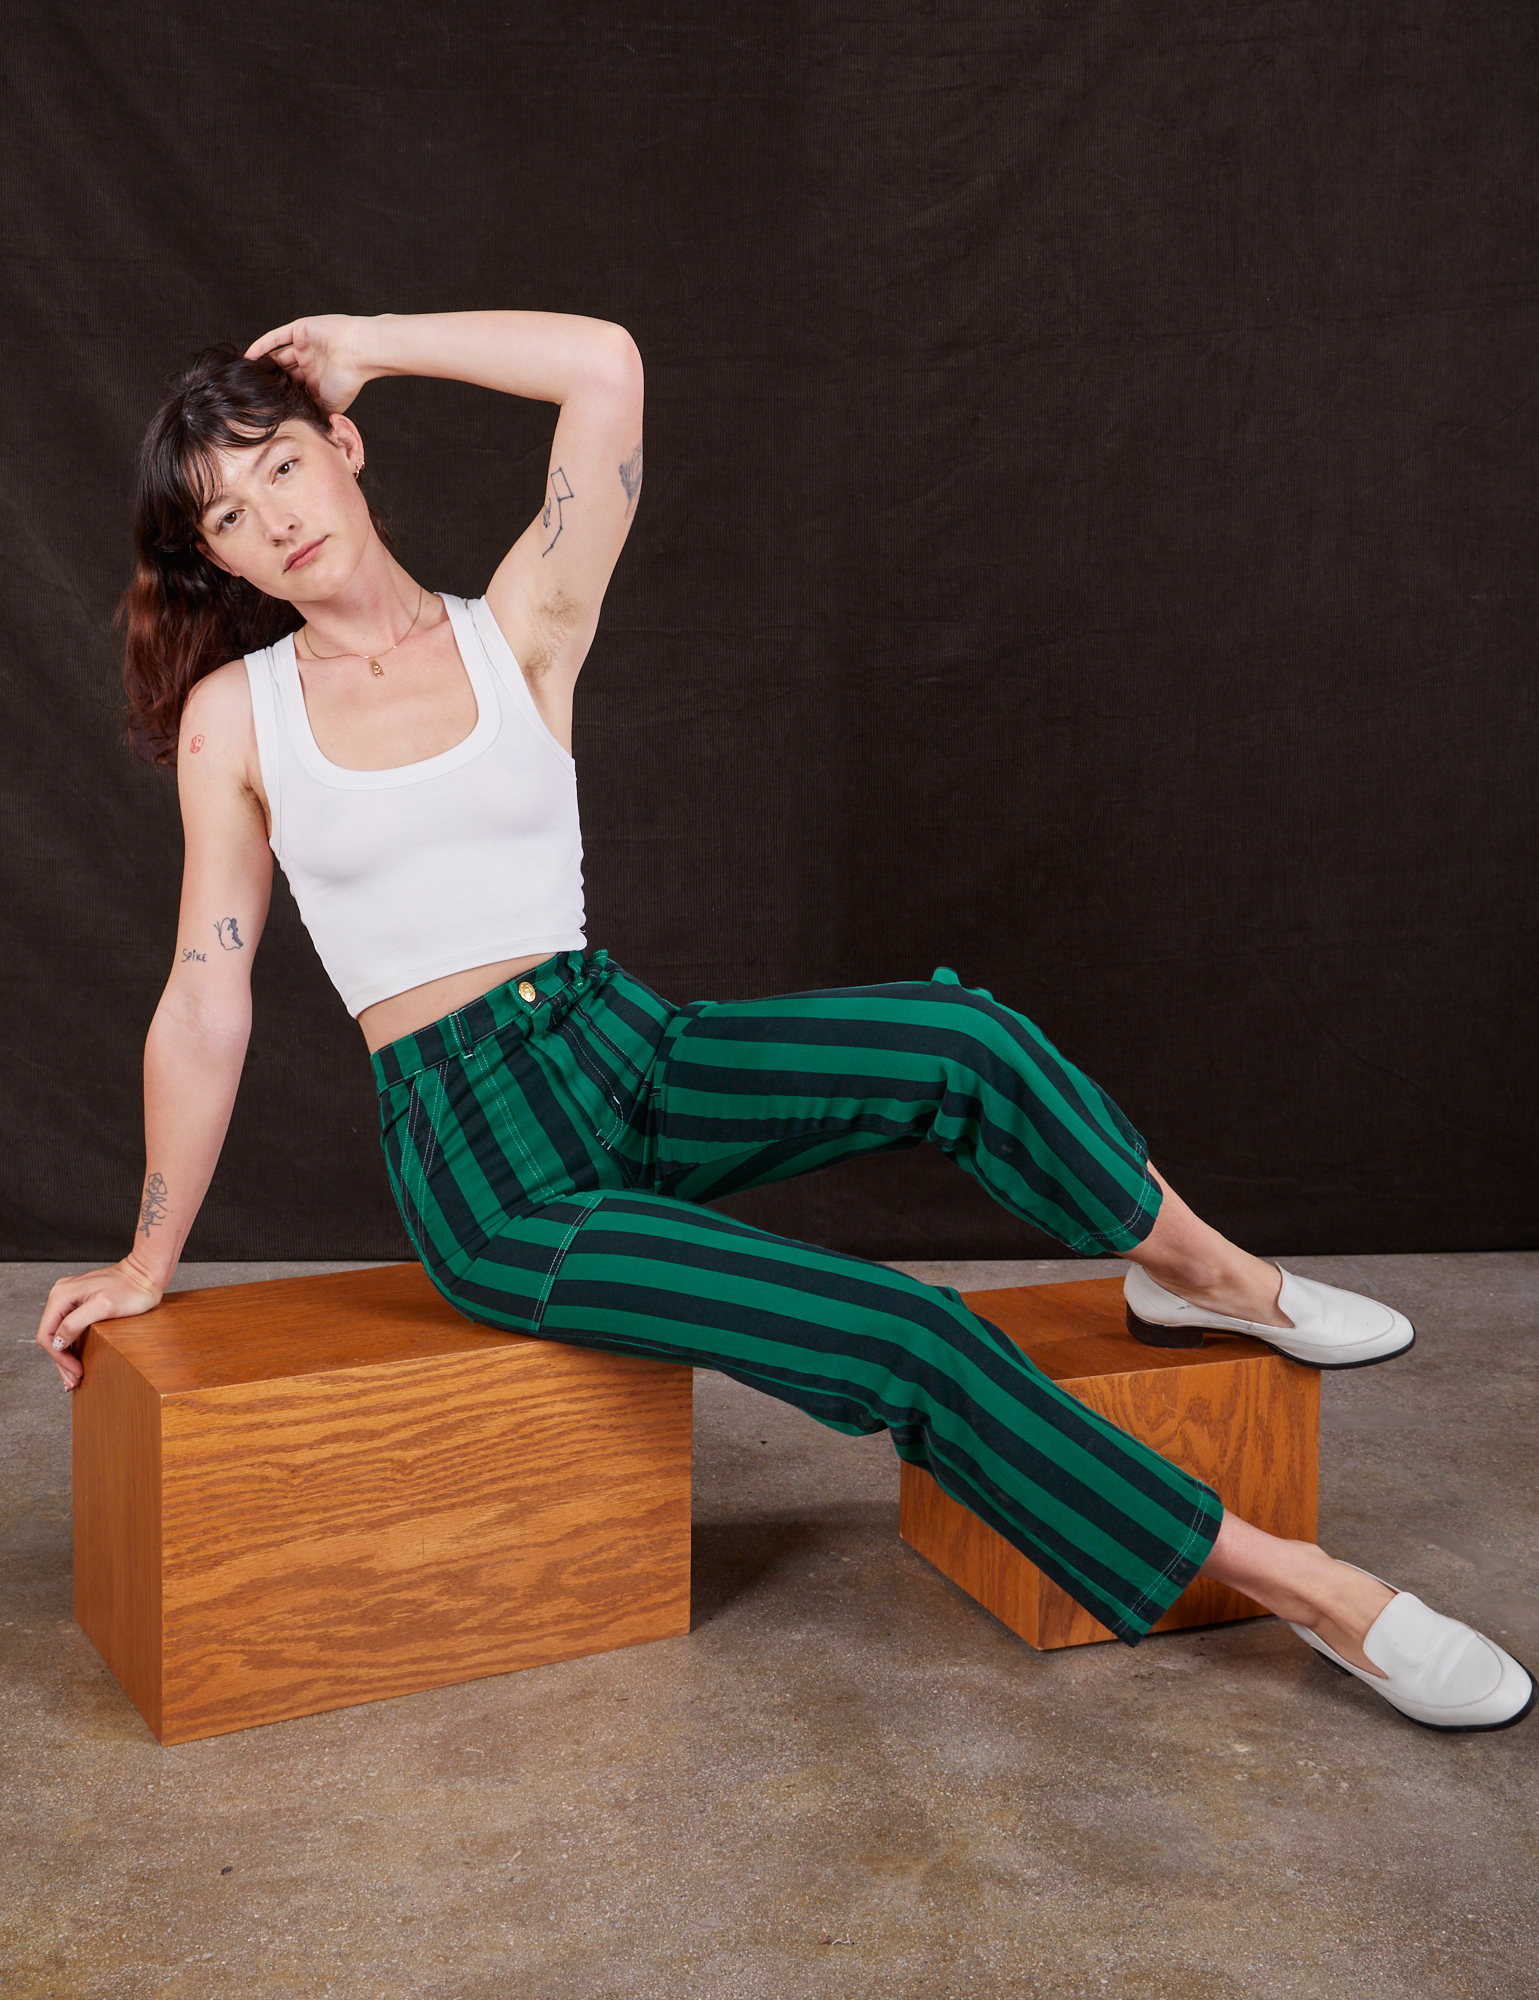 Alex is wearing Black Stripe Work Pants in Hunter and vintage off-white Cropped Tank Top